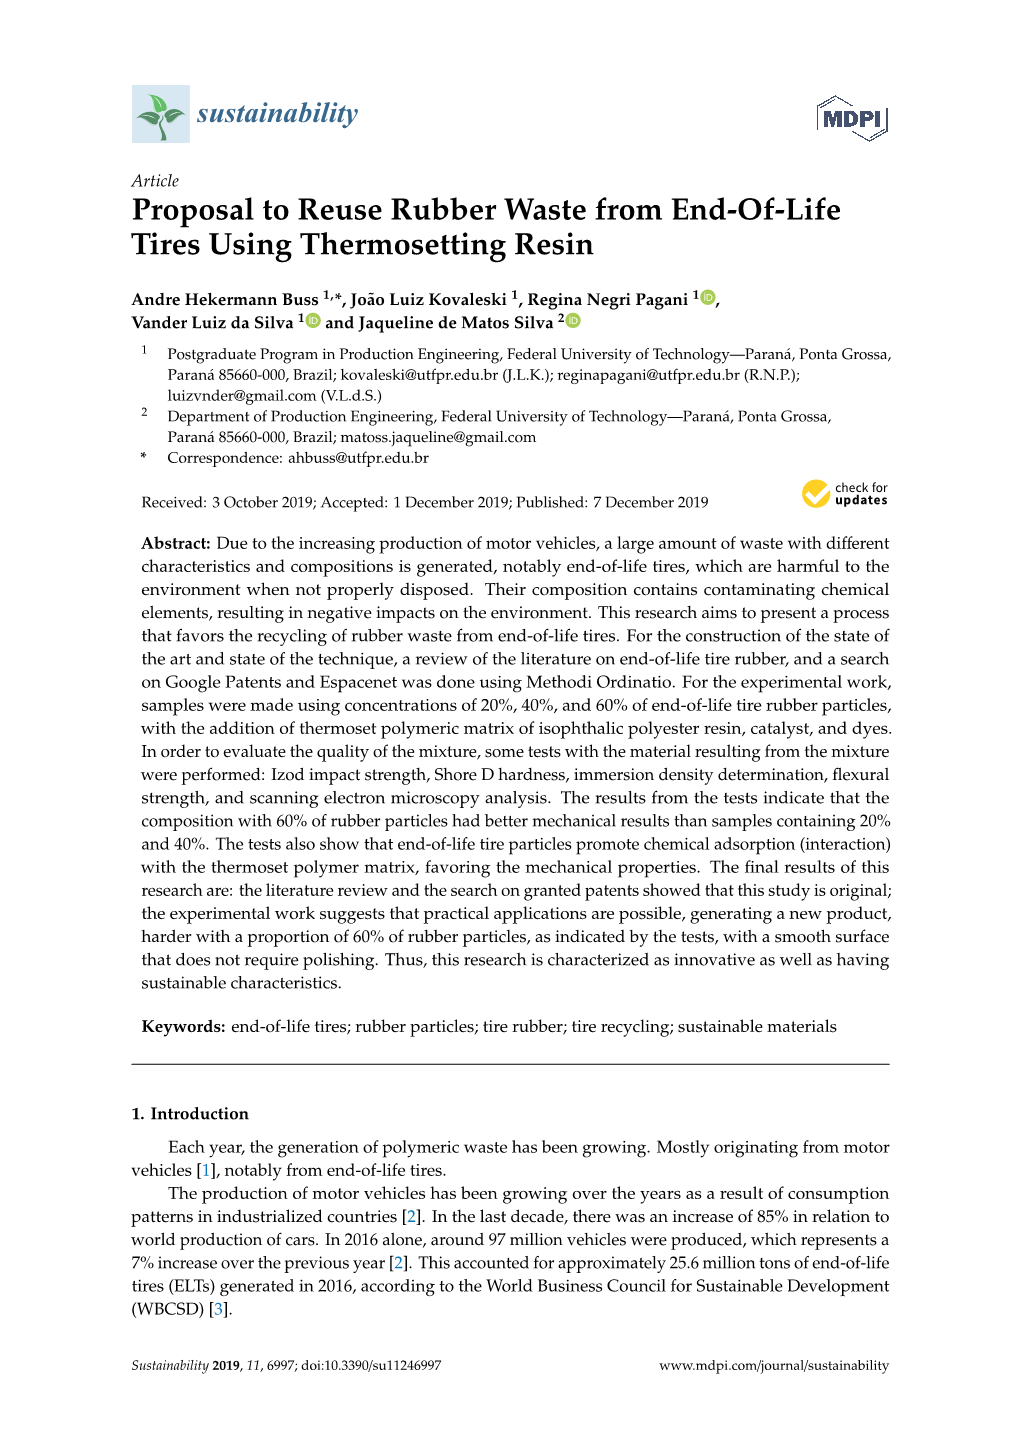 Proposal to Reuse Rubber Waste from End-Of-Life Tires Using Thermosetting Resin